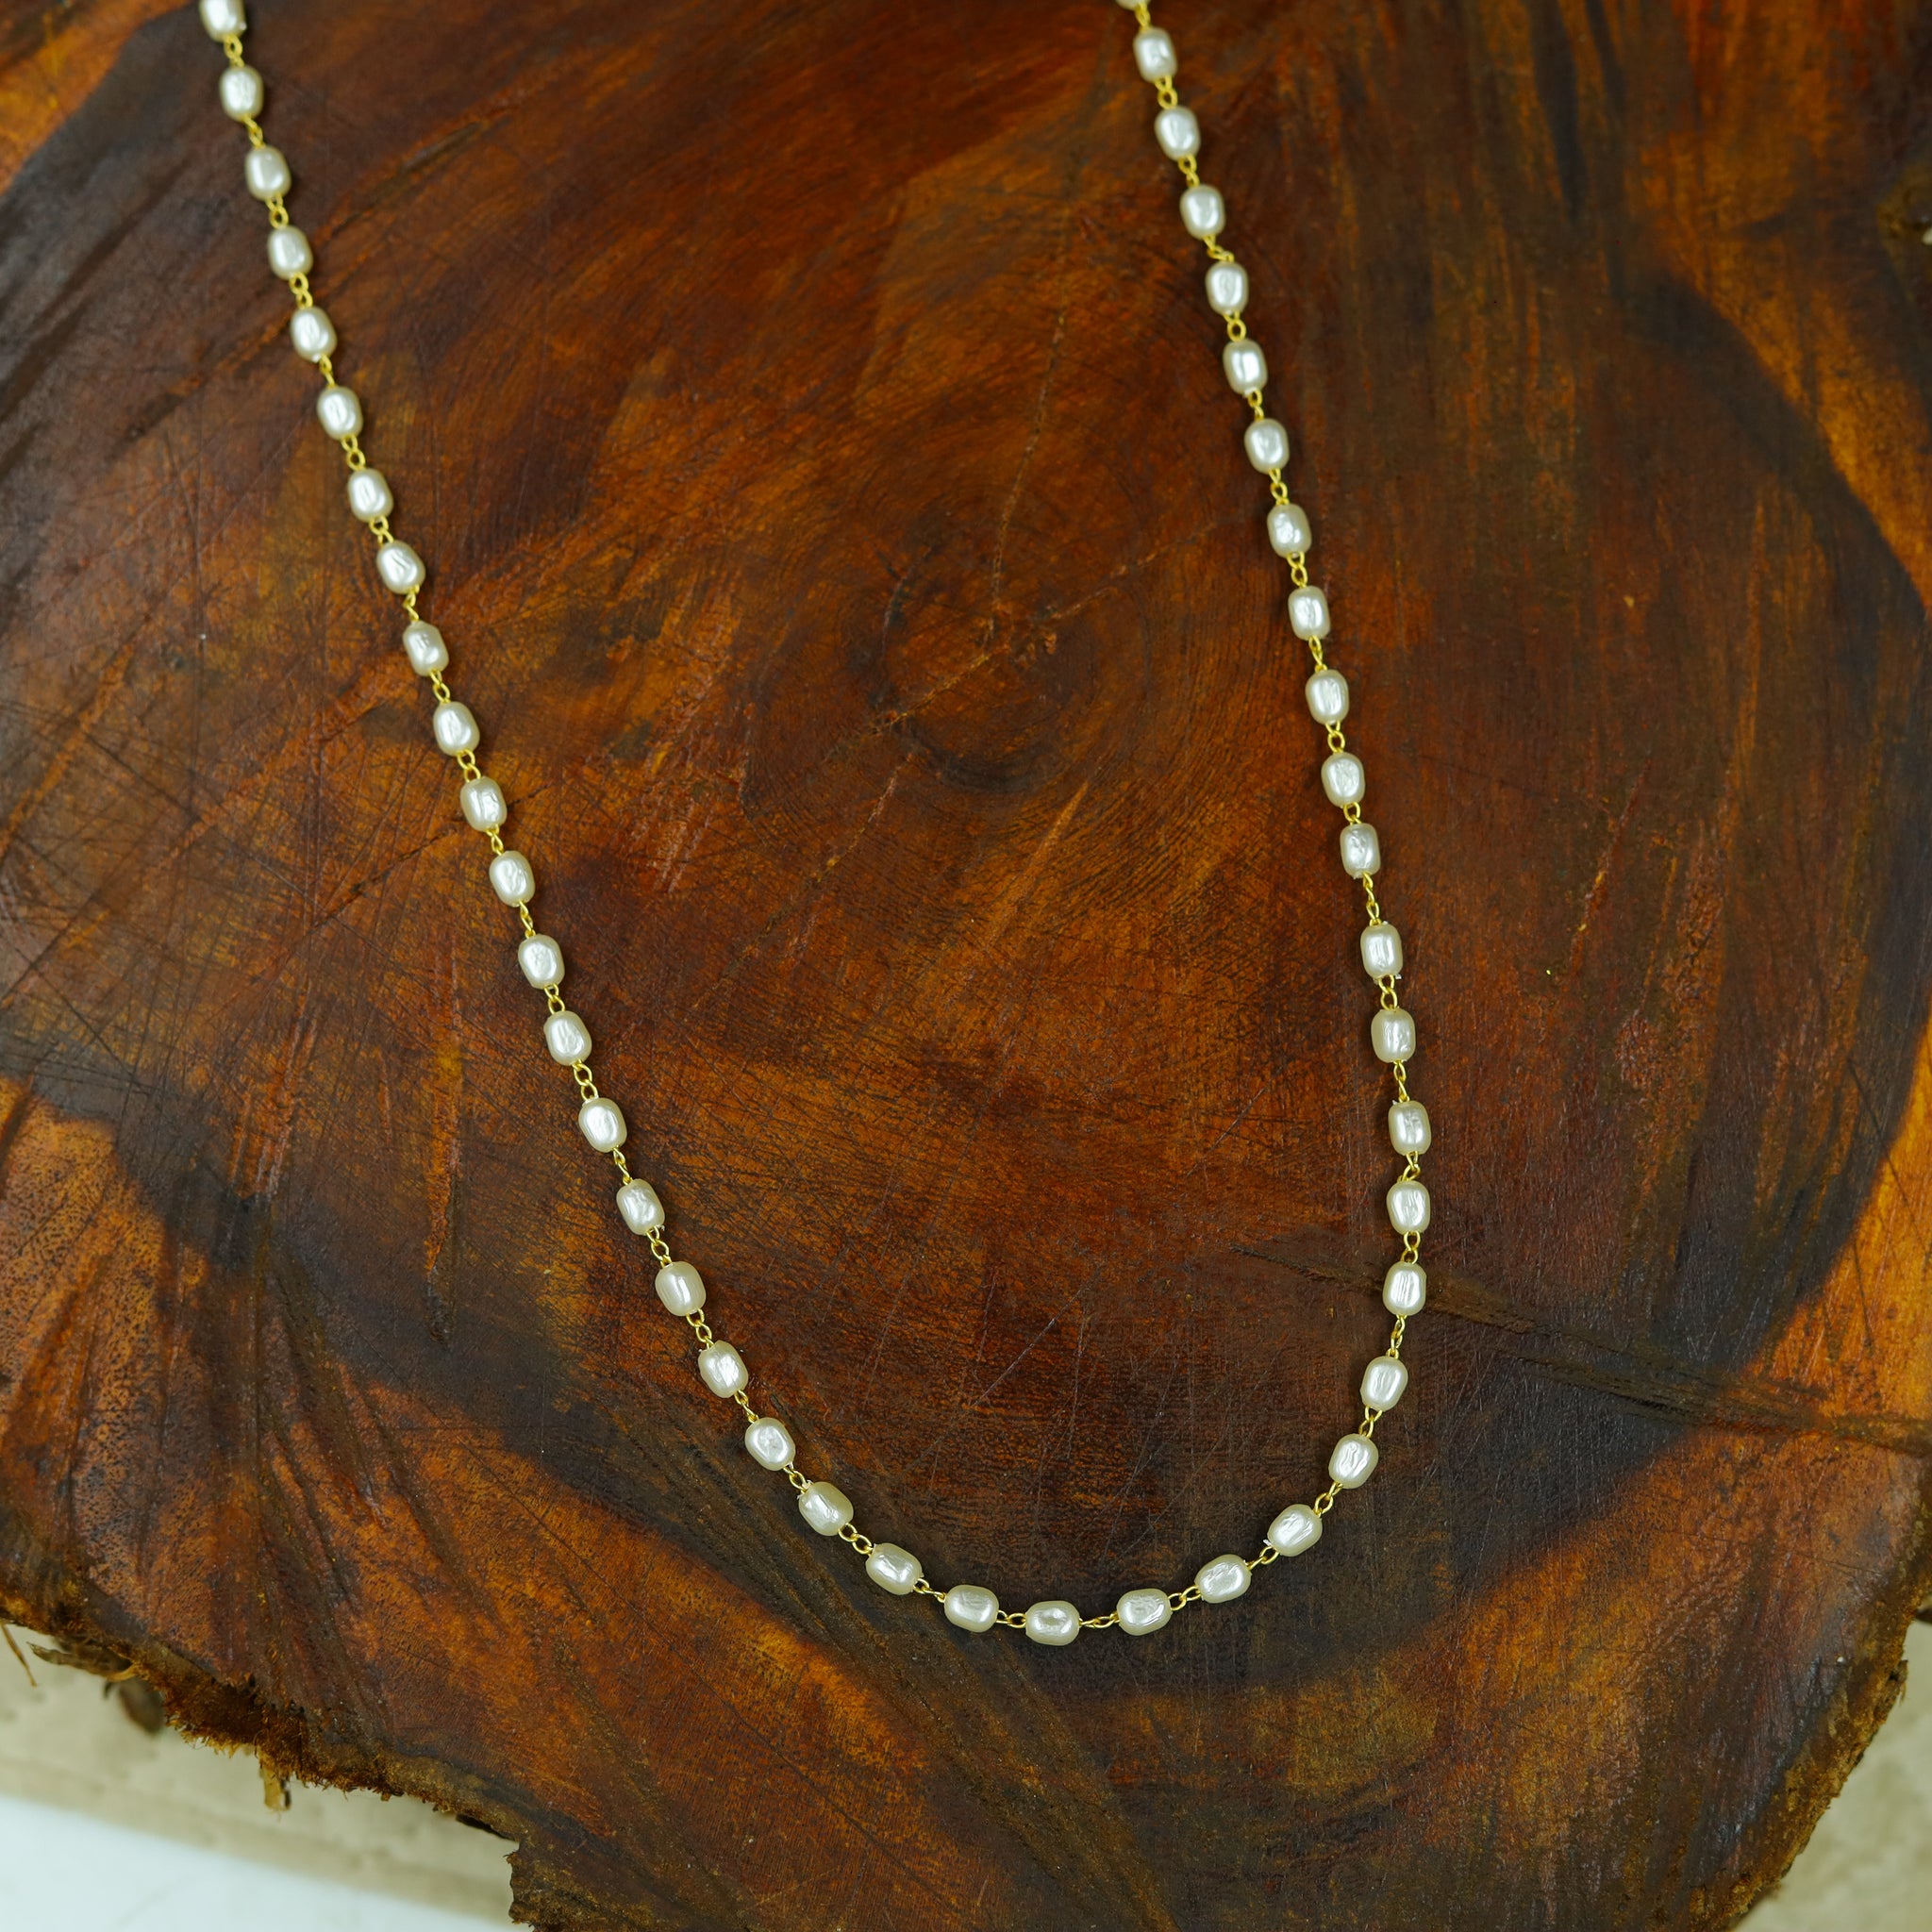 Round Neck Pearl Necklace Set 12845-31